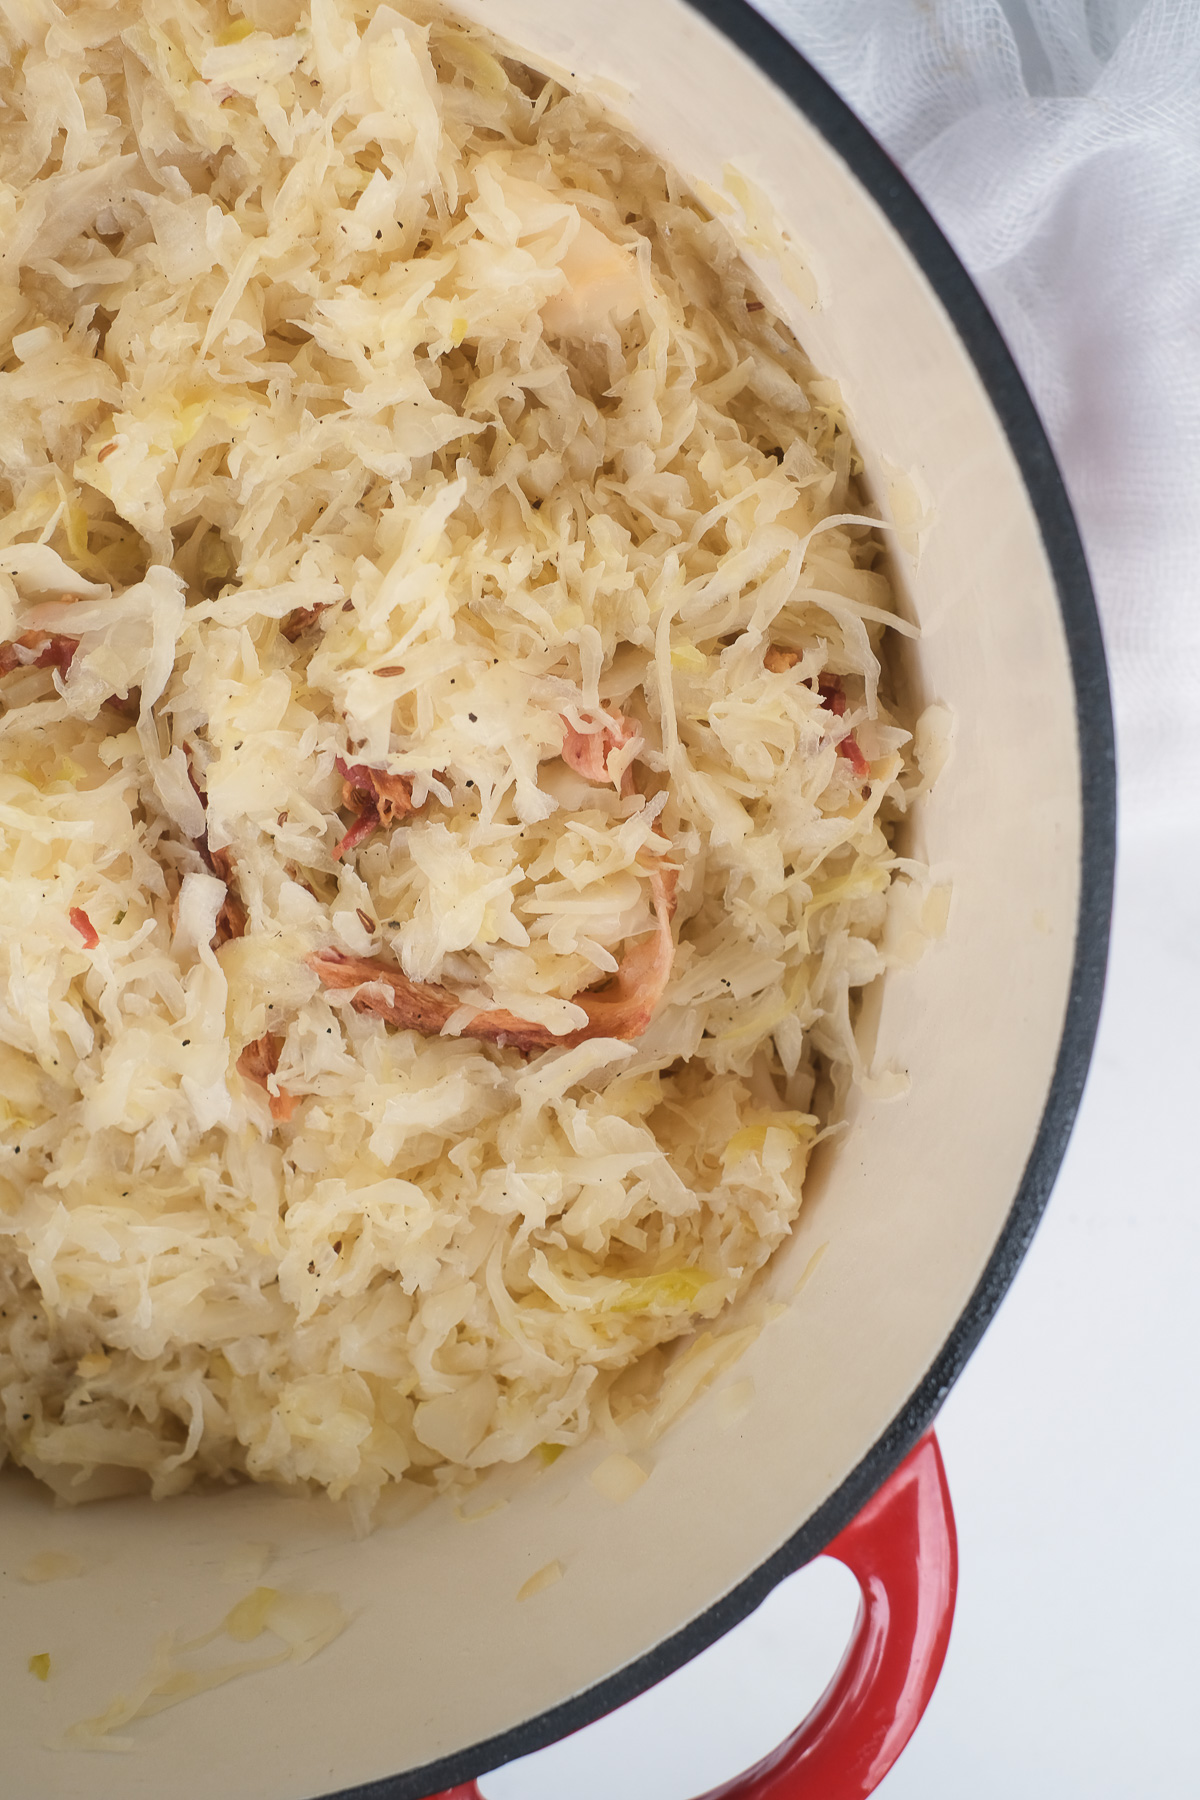 Close up view of sauerkraut with bacon bits in a red pot.